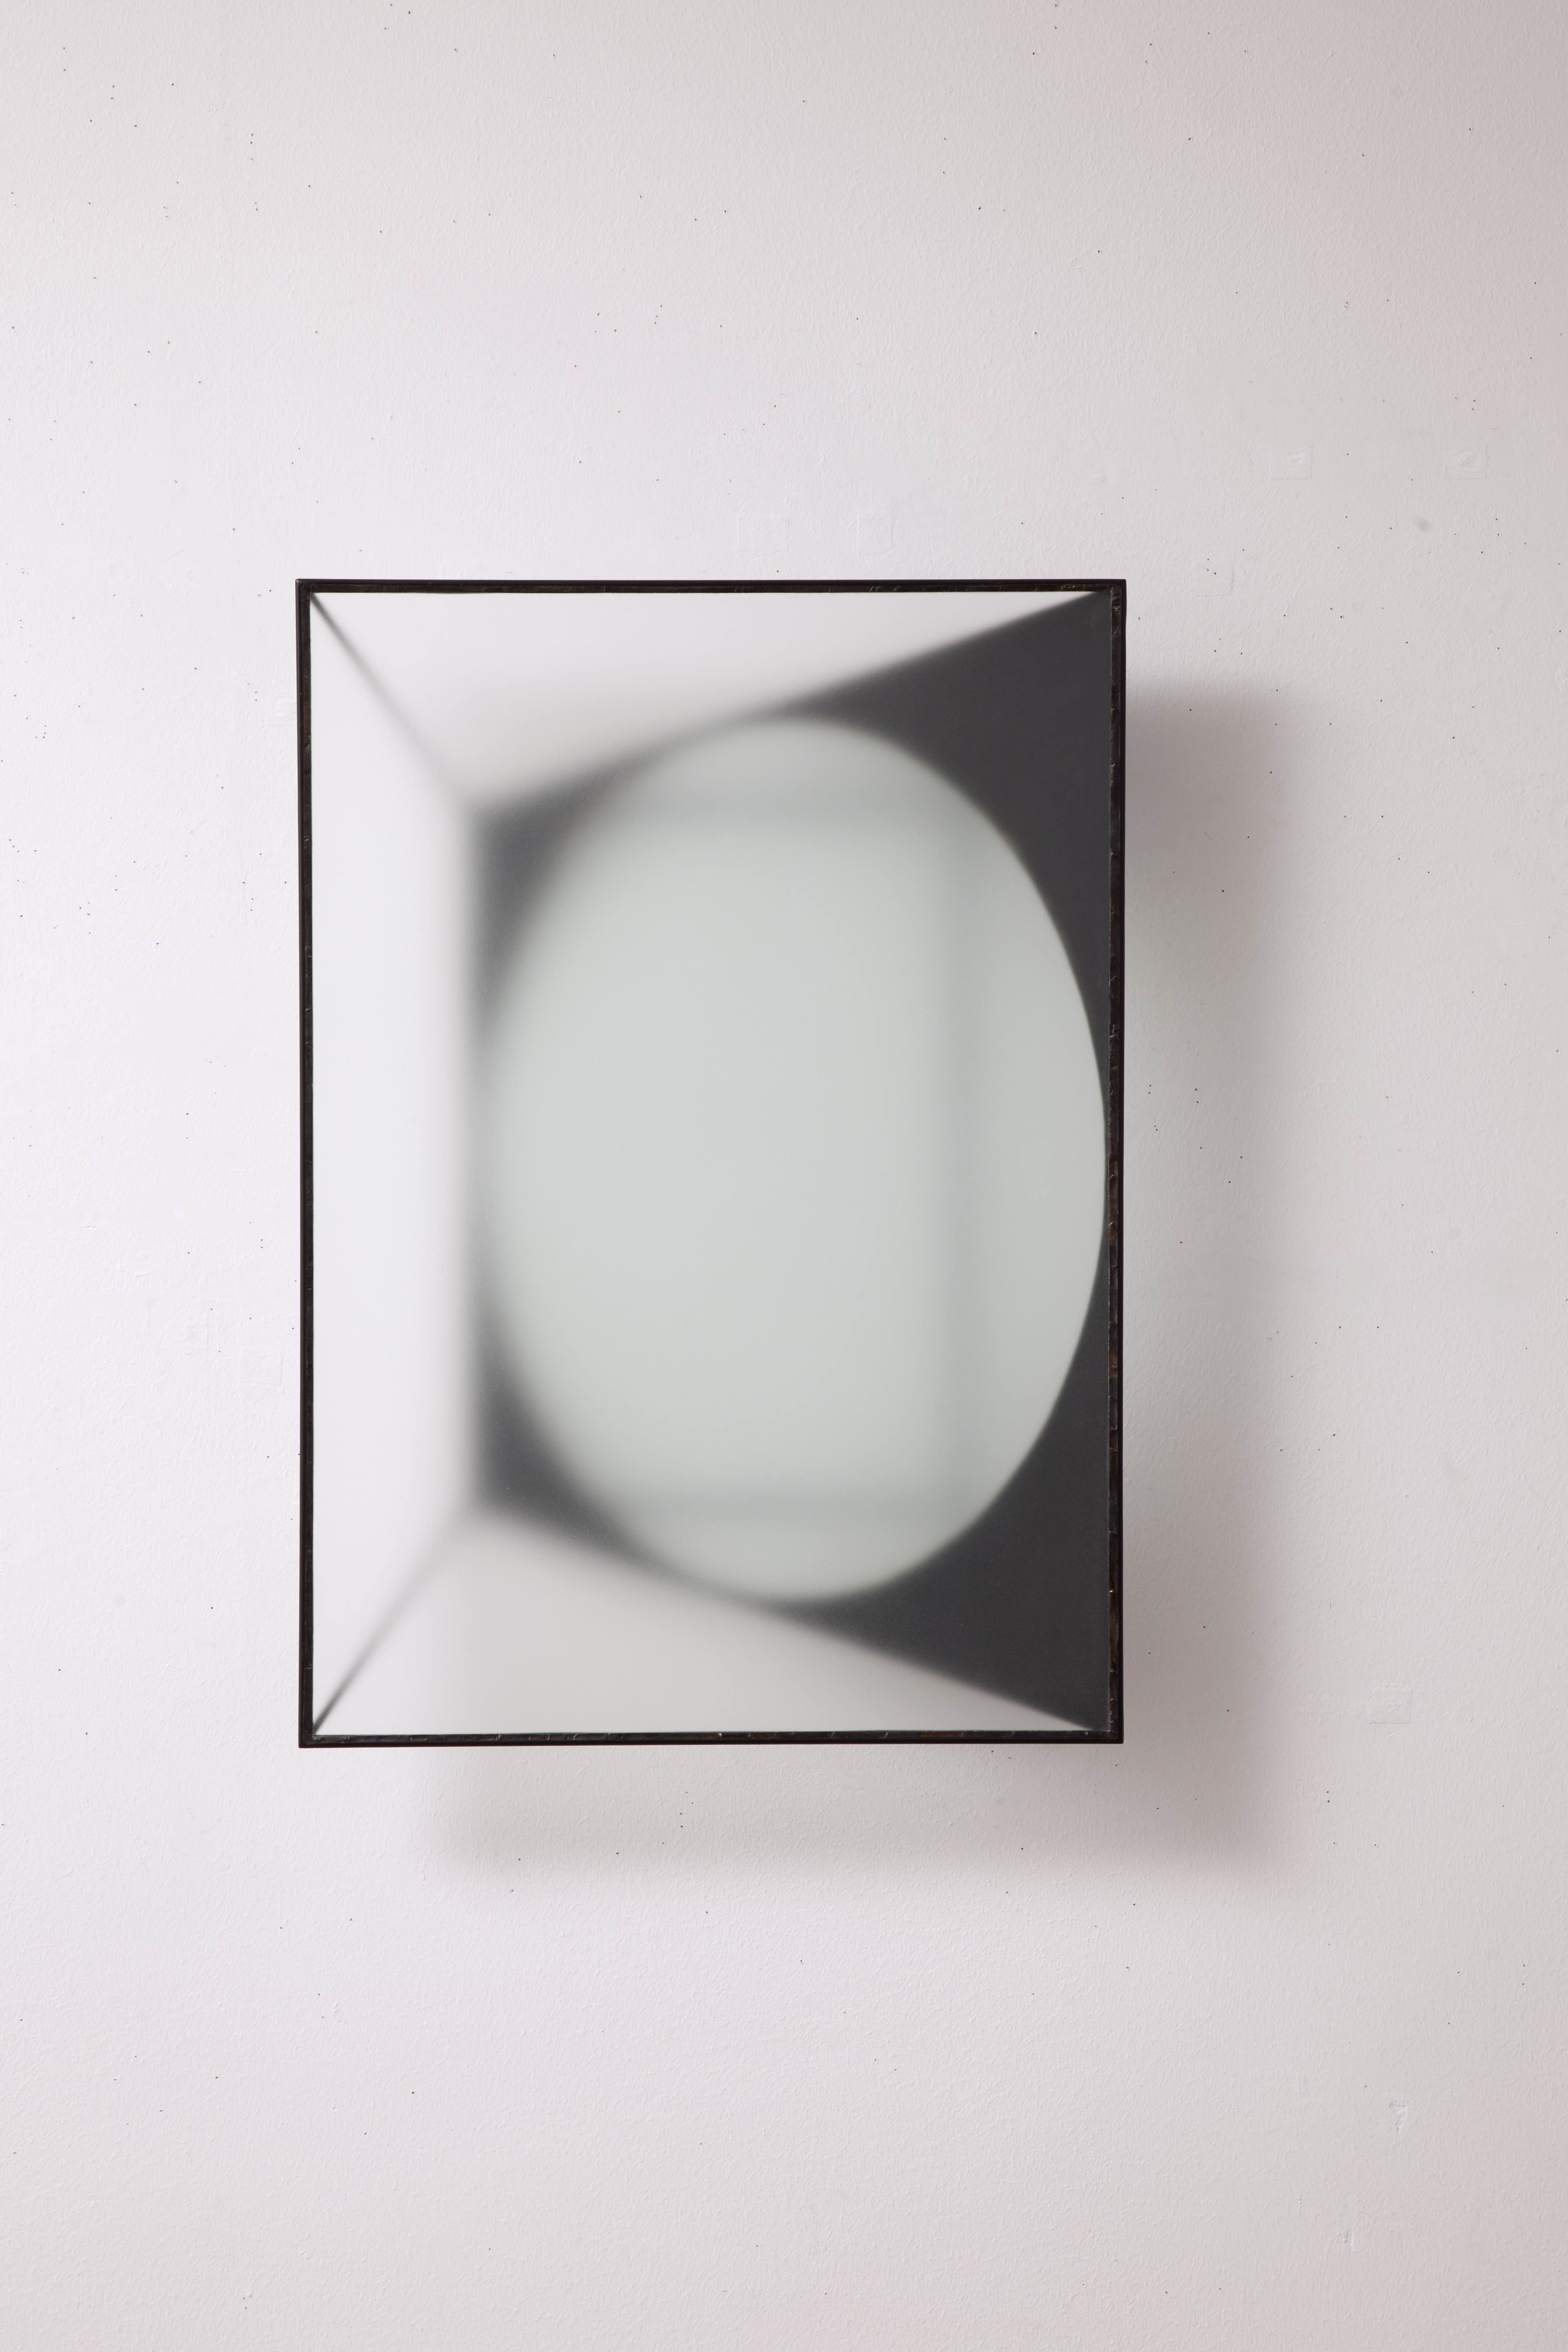 Reinoud Oudshoorn, Untitled, iron and frosted glass, 67 x 47 x 9 cm, 2014